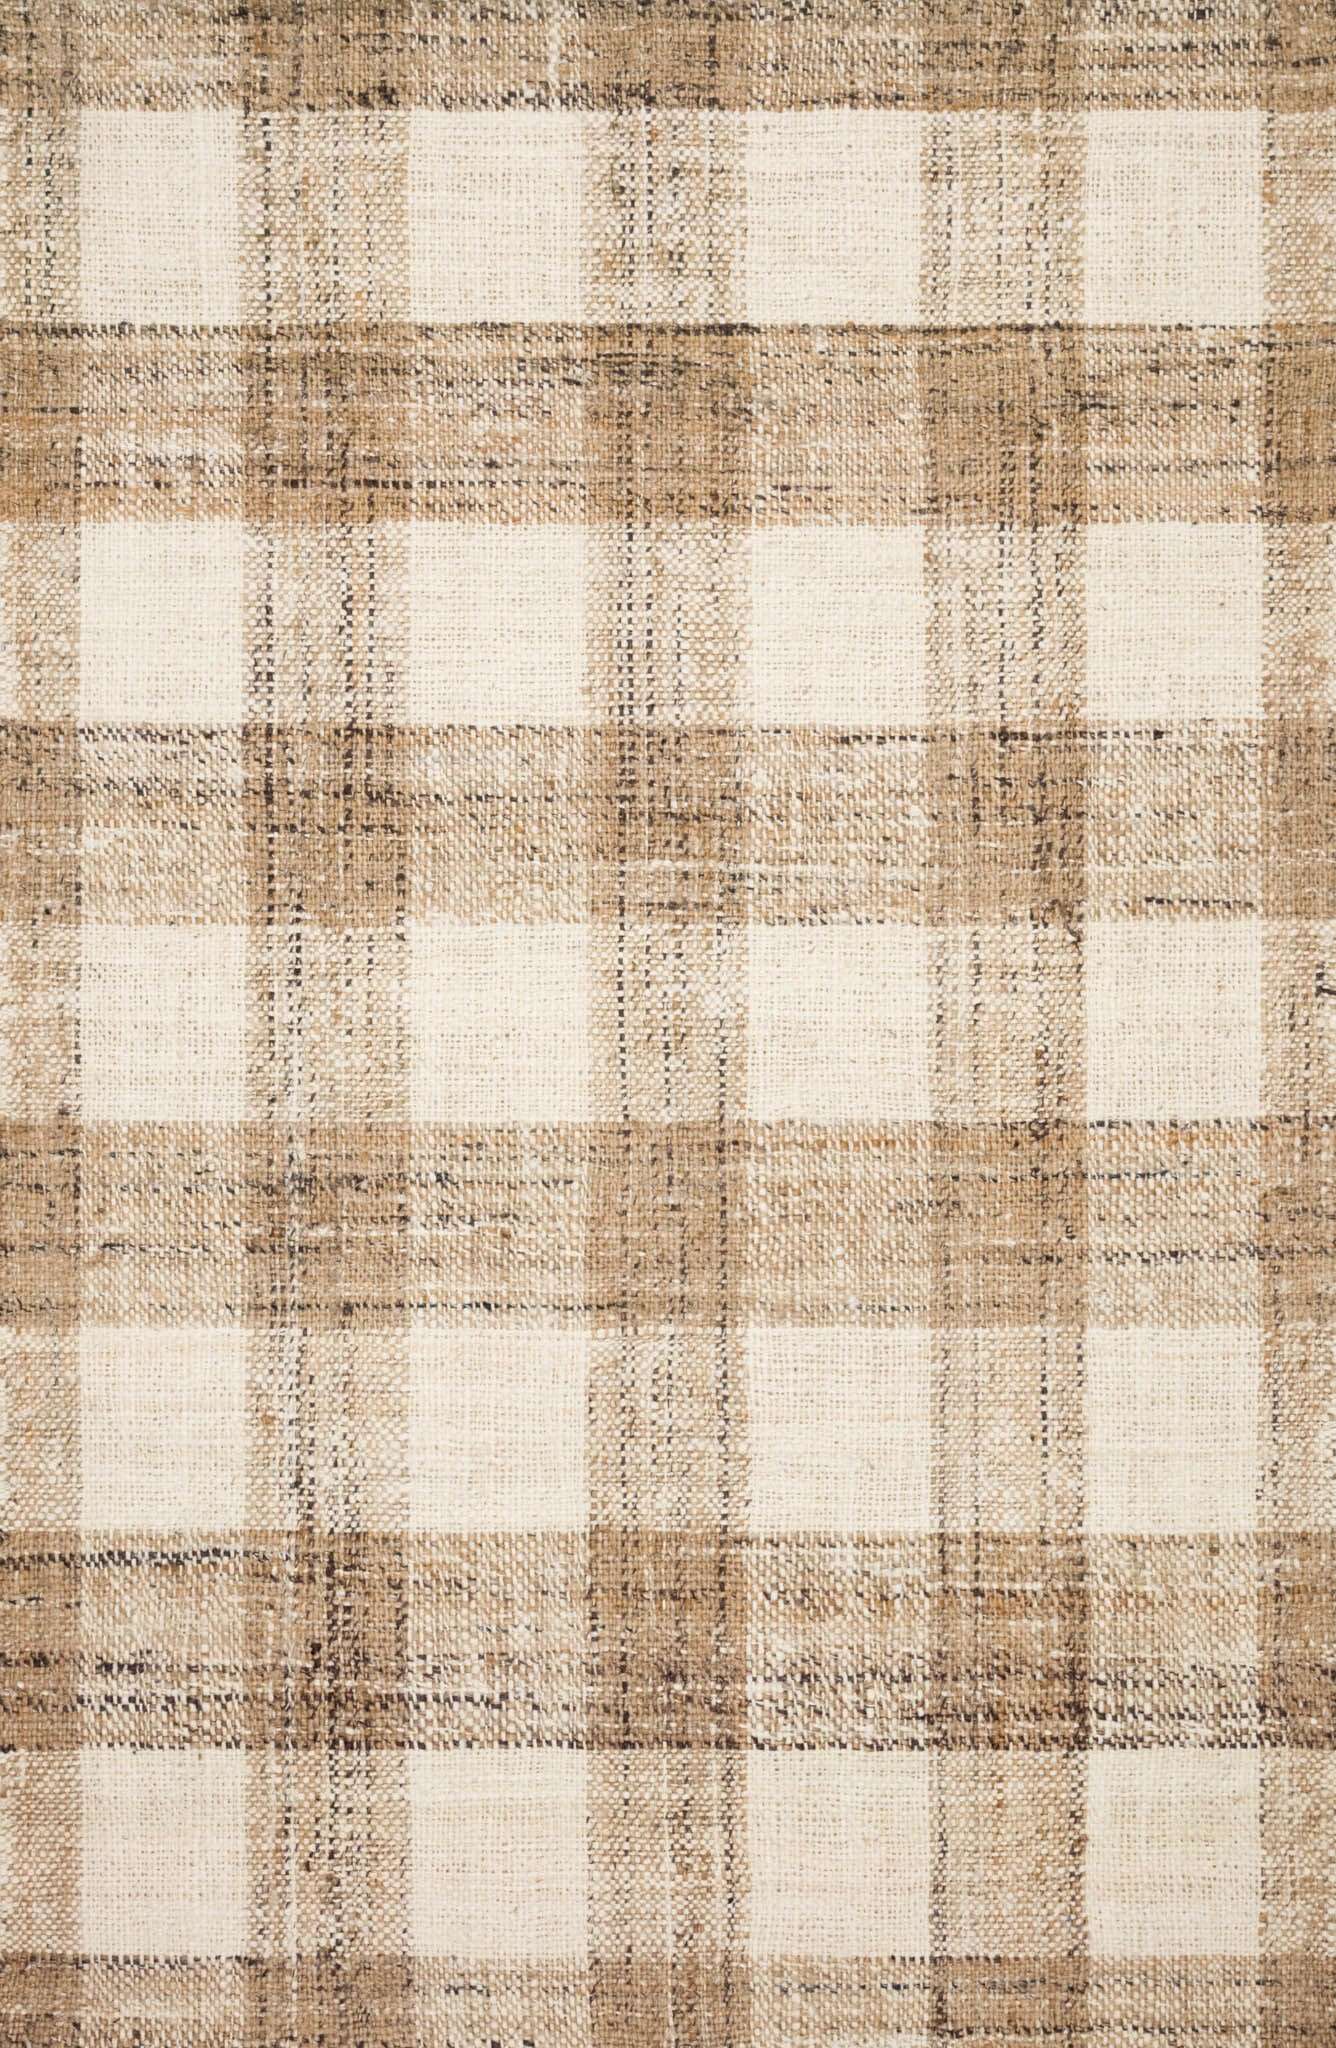 Crew by Magnolia Home CRE-02 Natural Rug - Rug & Home